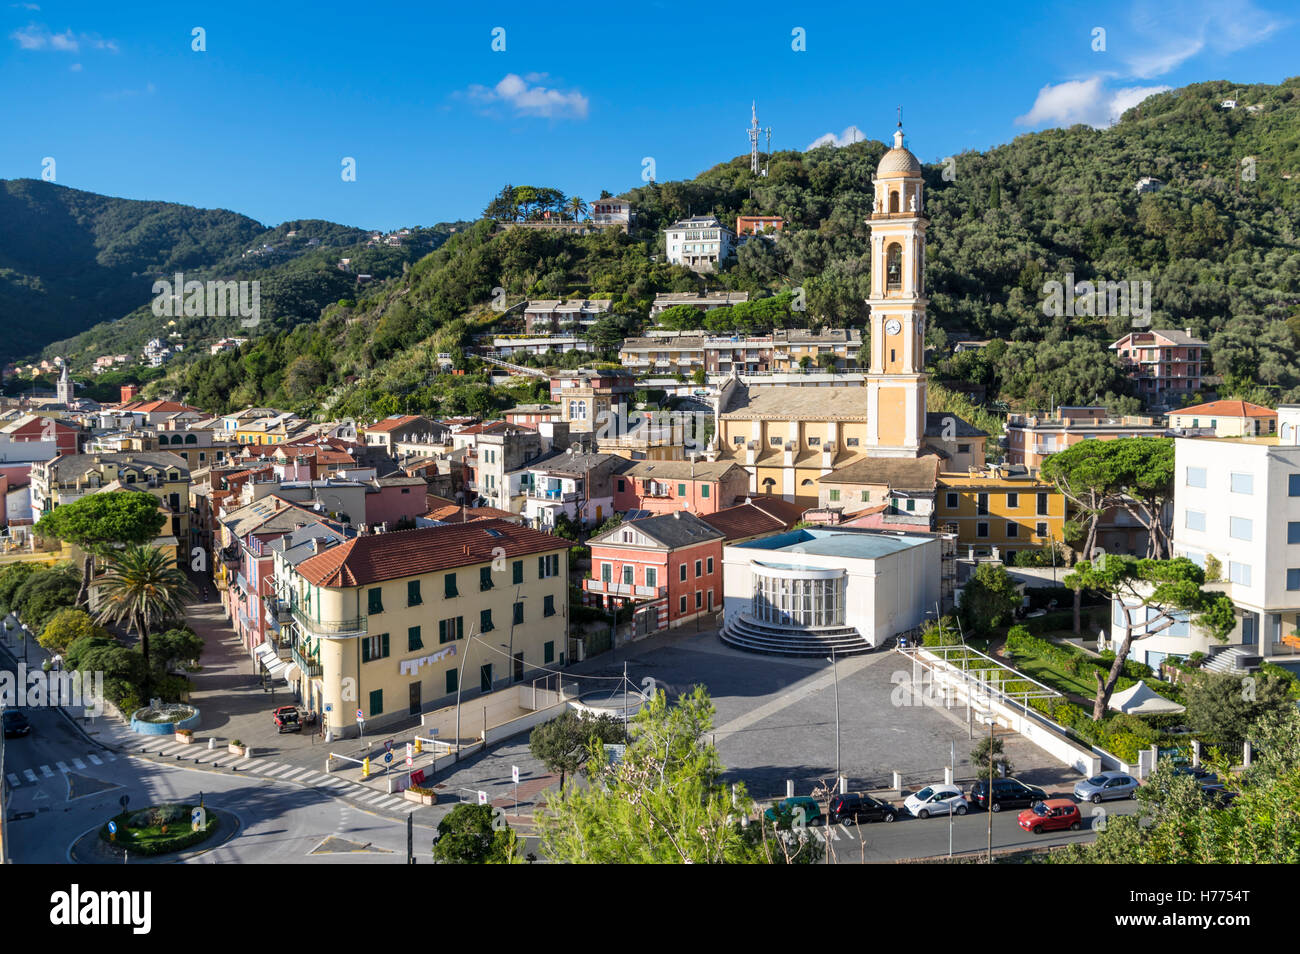 View of the town of Moneglia, Liguria, Italy, framed by hills. Stock Photo